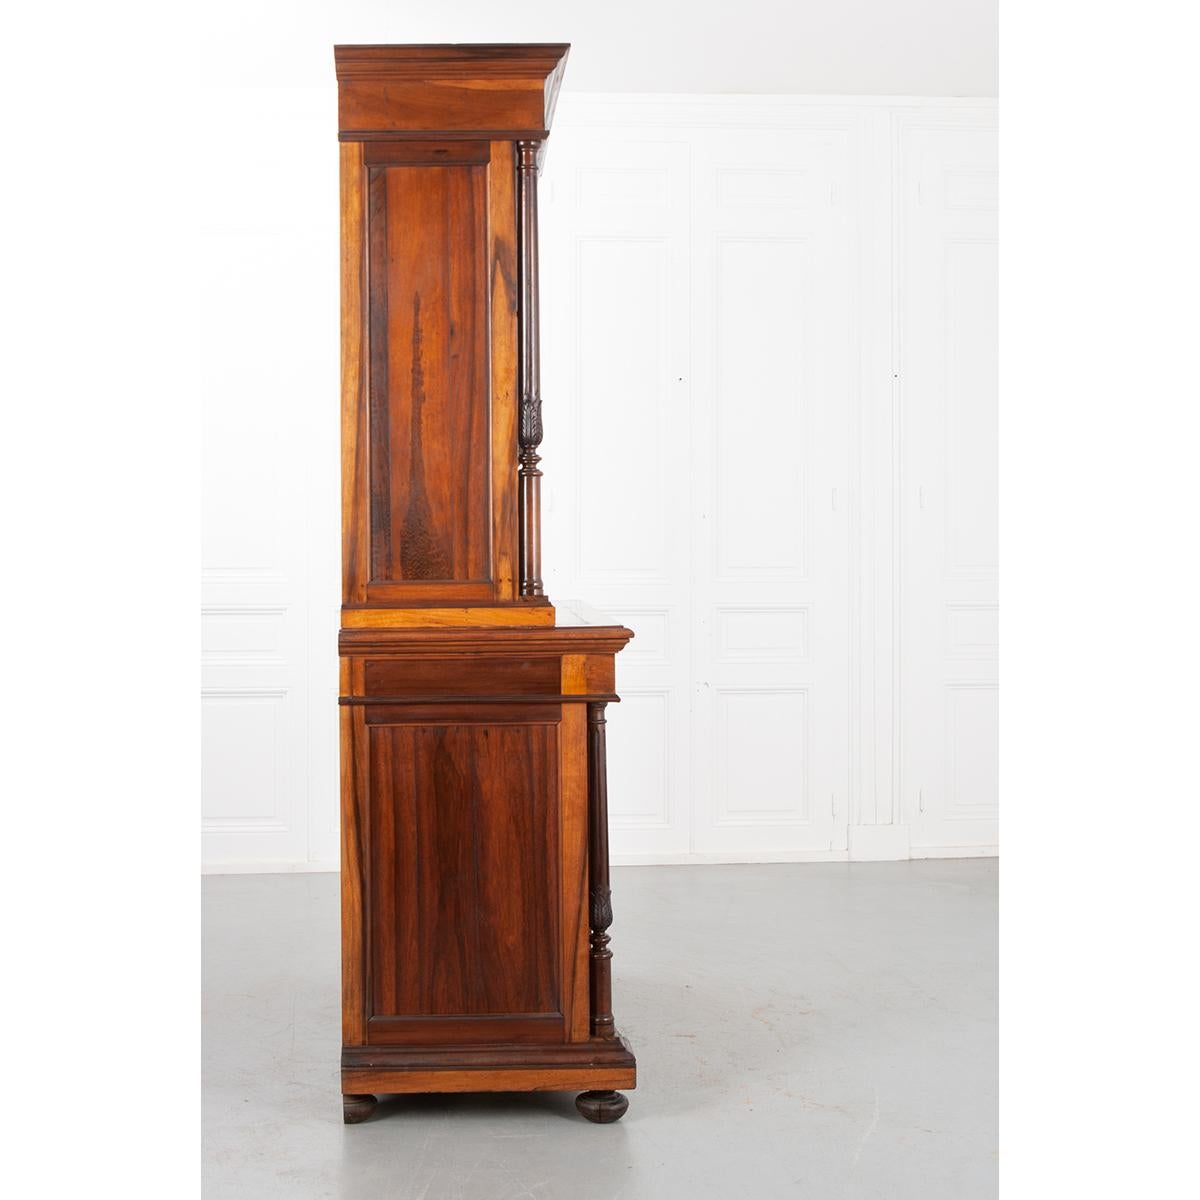 This beautiful French 19th century buffet a deux corps is made of solid rosewood. It has a wonderful patina and amazing natural wood design on the bottom doors. Fluted columns with carving are on either side of these doors. The bottom half of the